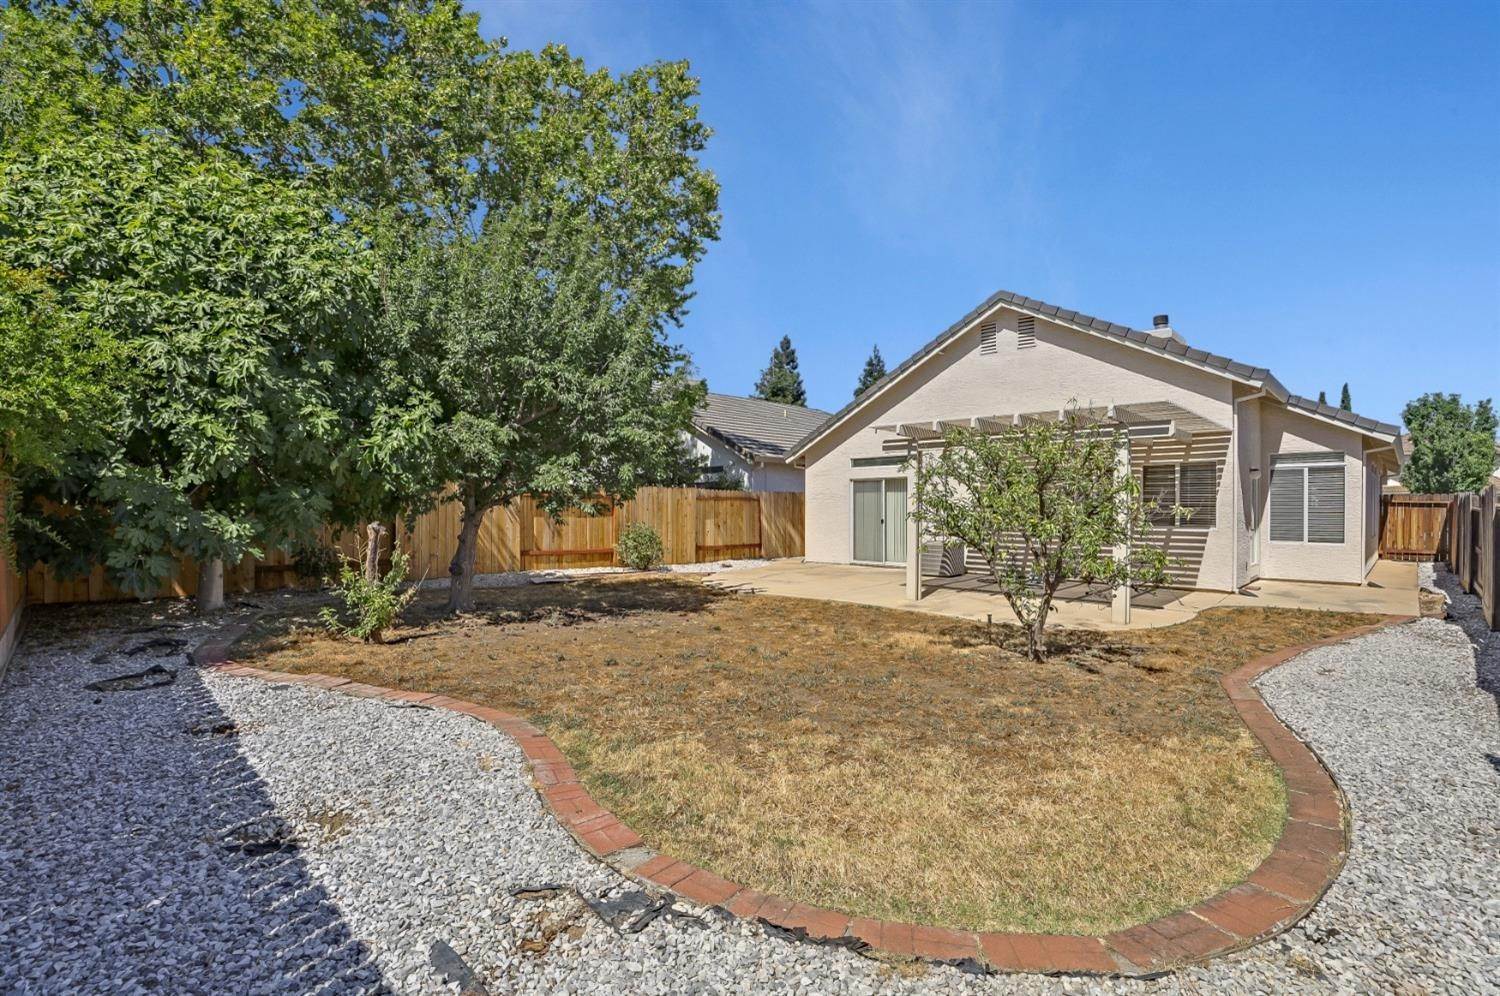 45. Single Family Homes for Active at 8716 Summer Pointe Drive Elk Grove, California 95624 United States